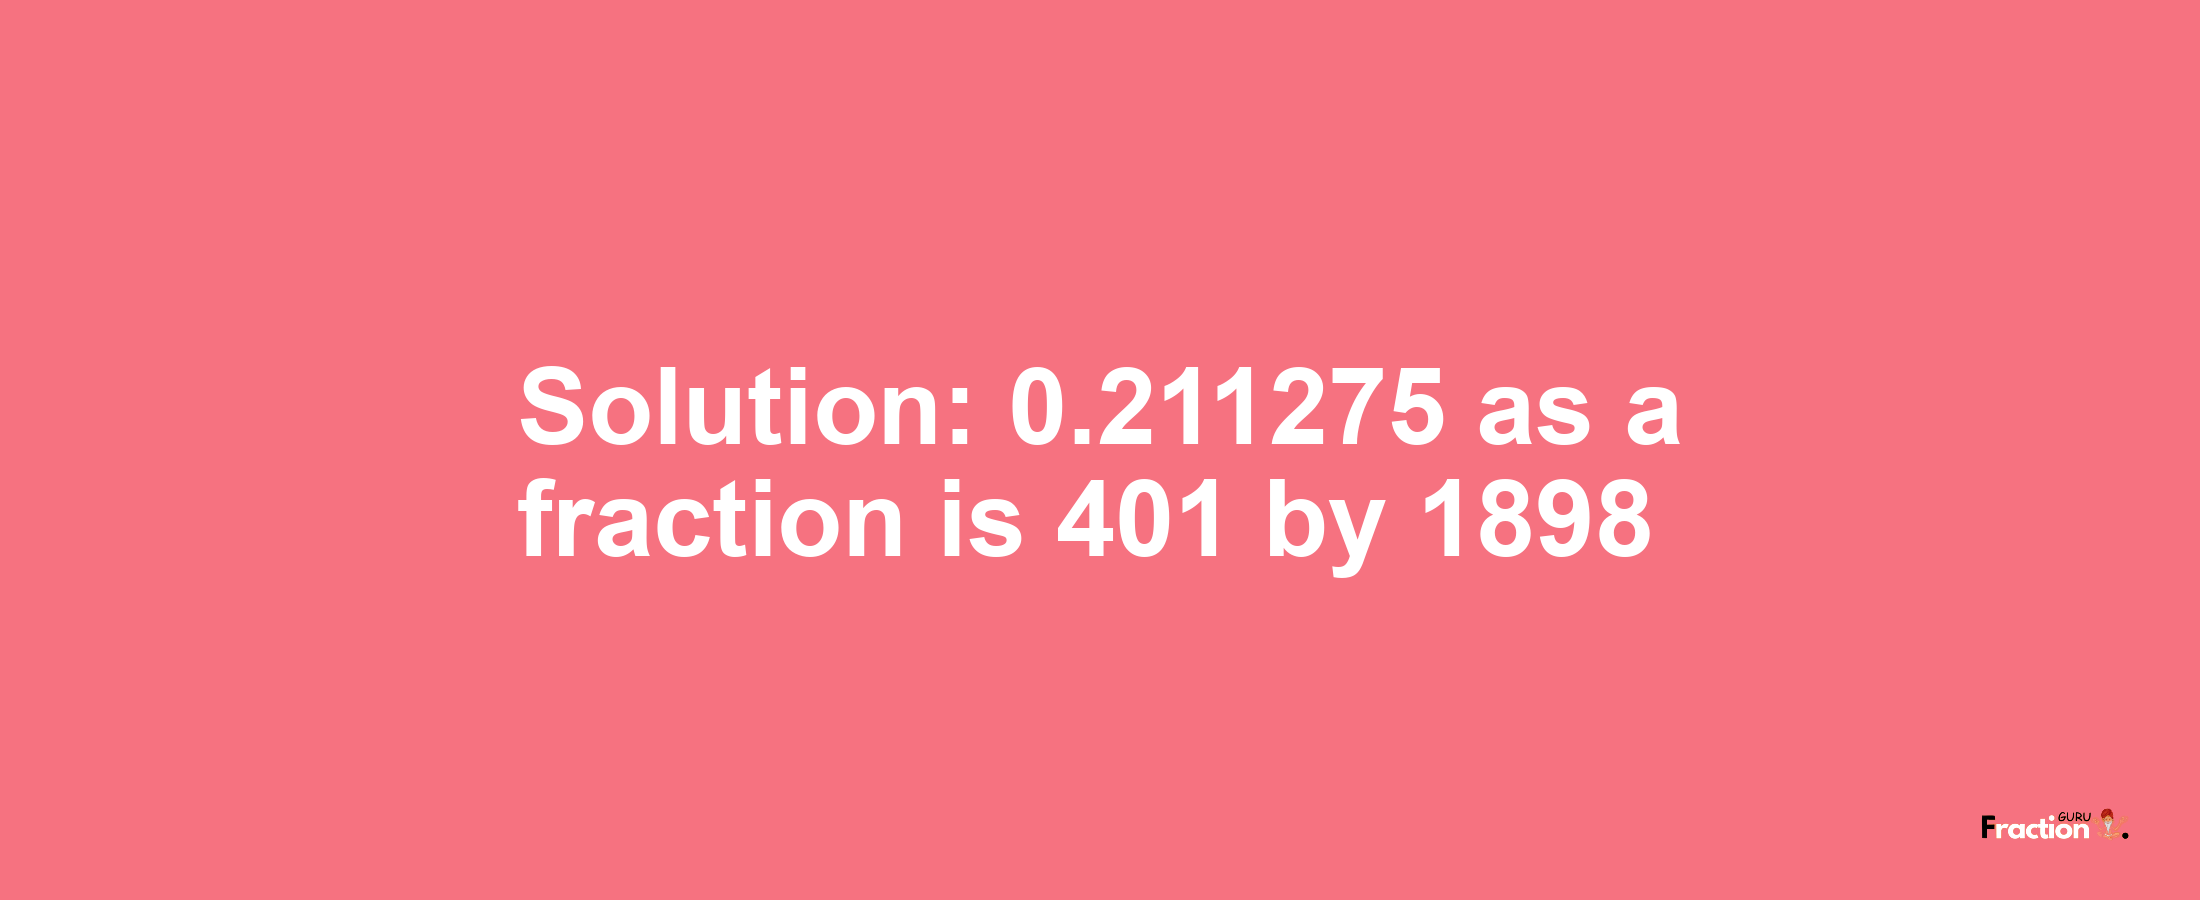 Solution:0.211275 as a fraction is 401/1898